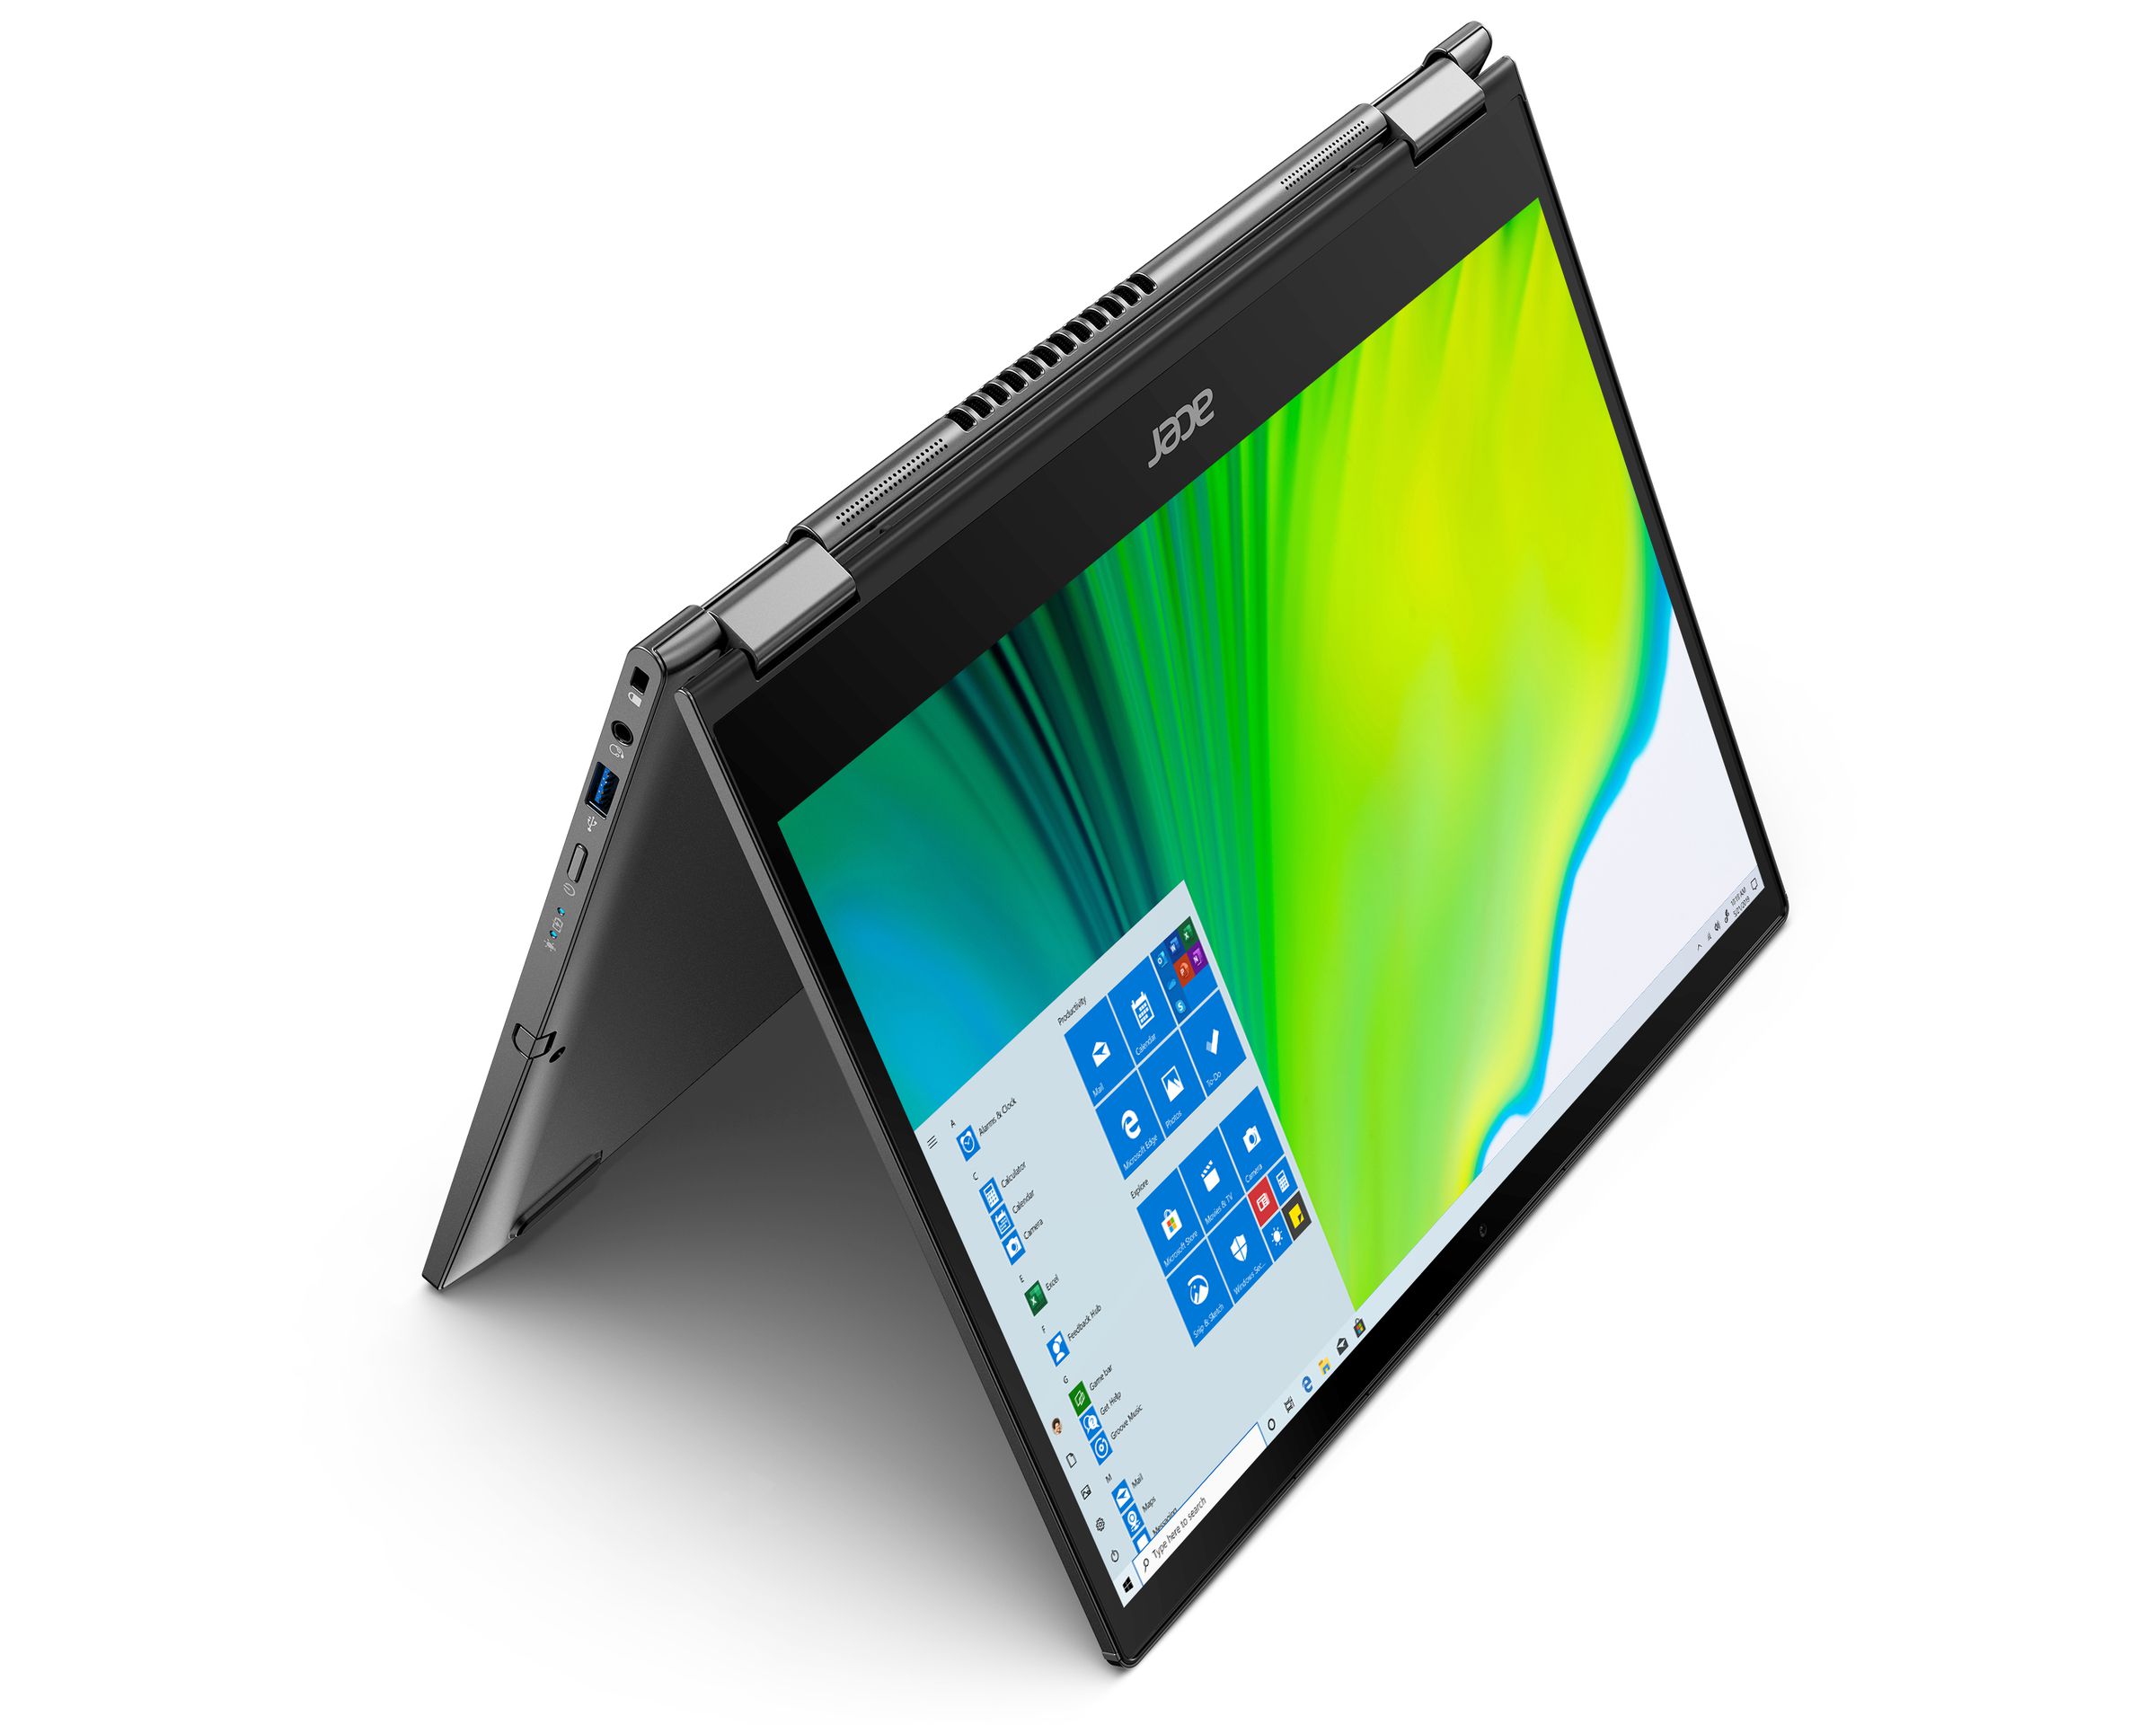 Its 360-degree hinge allows its screen to be flipped around for touchscreen use.